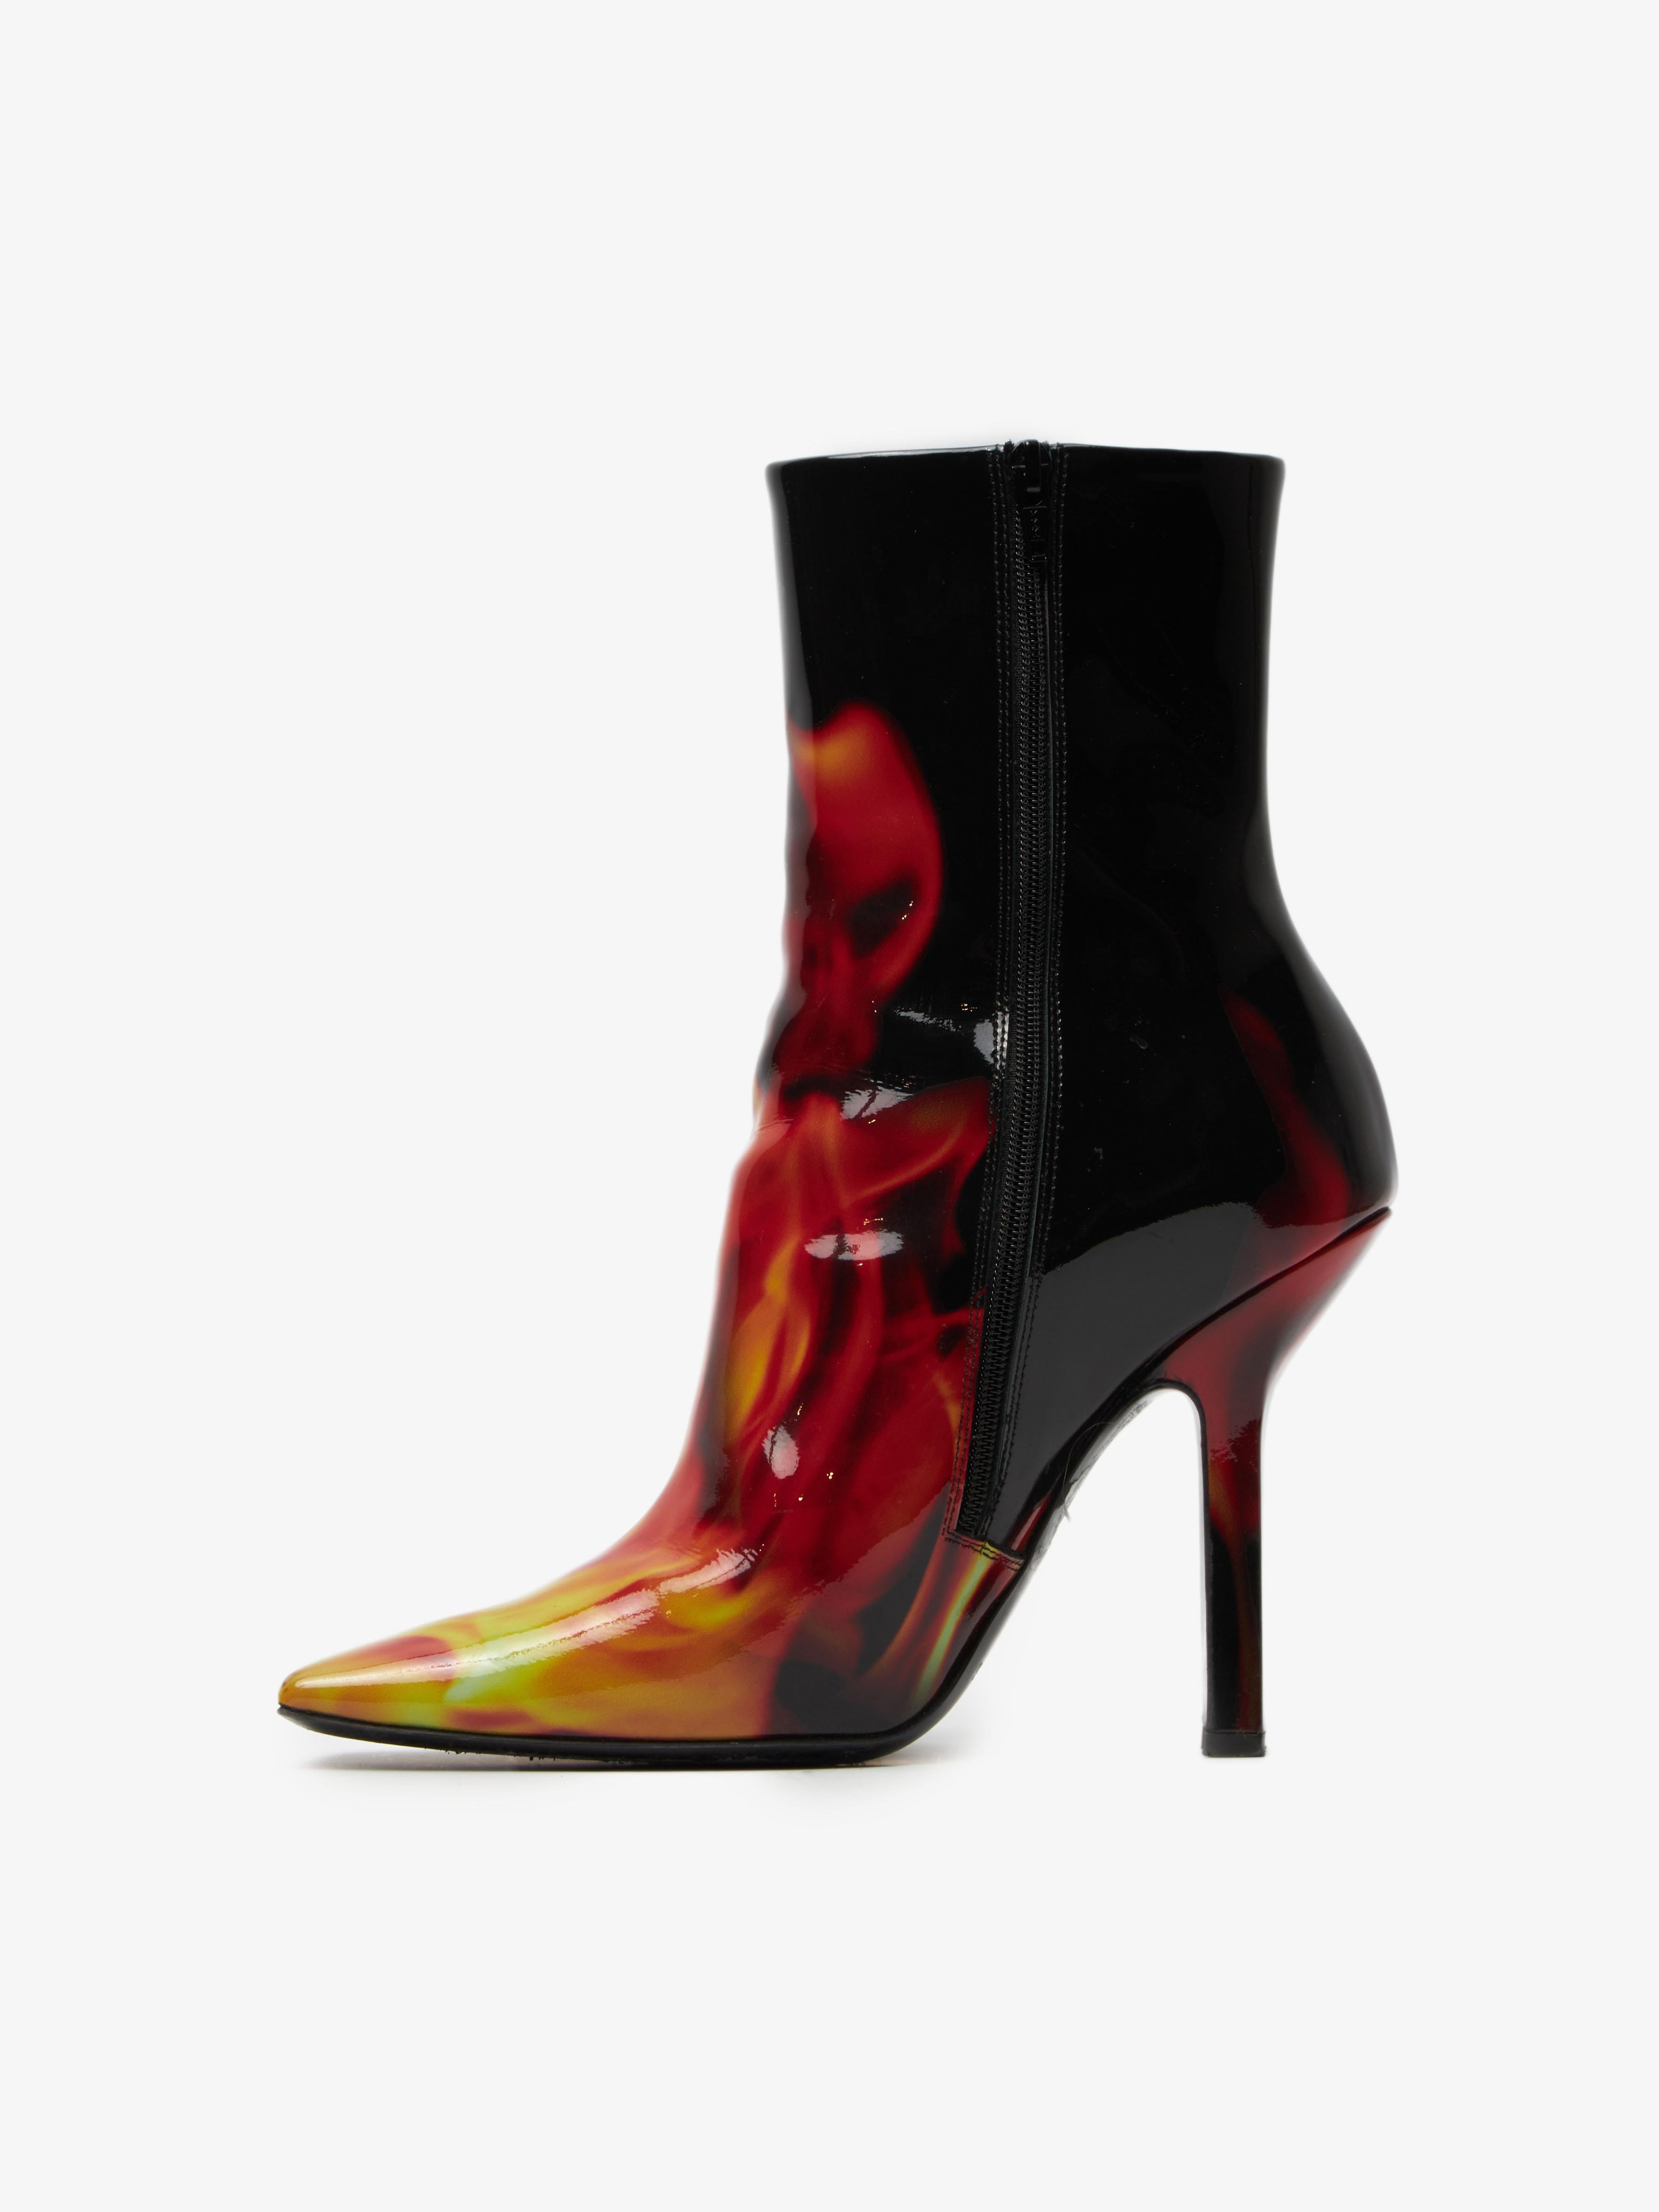 Vetements  Black Flame Printed High Heel Boots
Size marked: 38
Condition: Gently used/no box
Measurements: 
(107974)